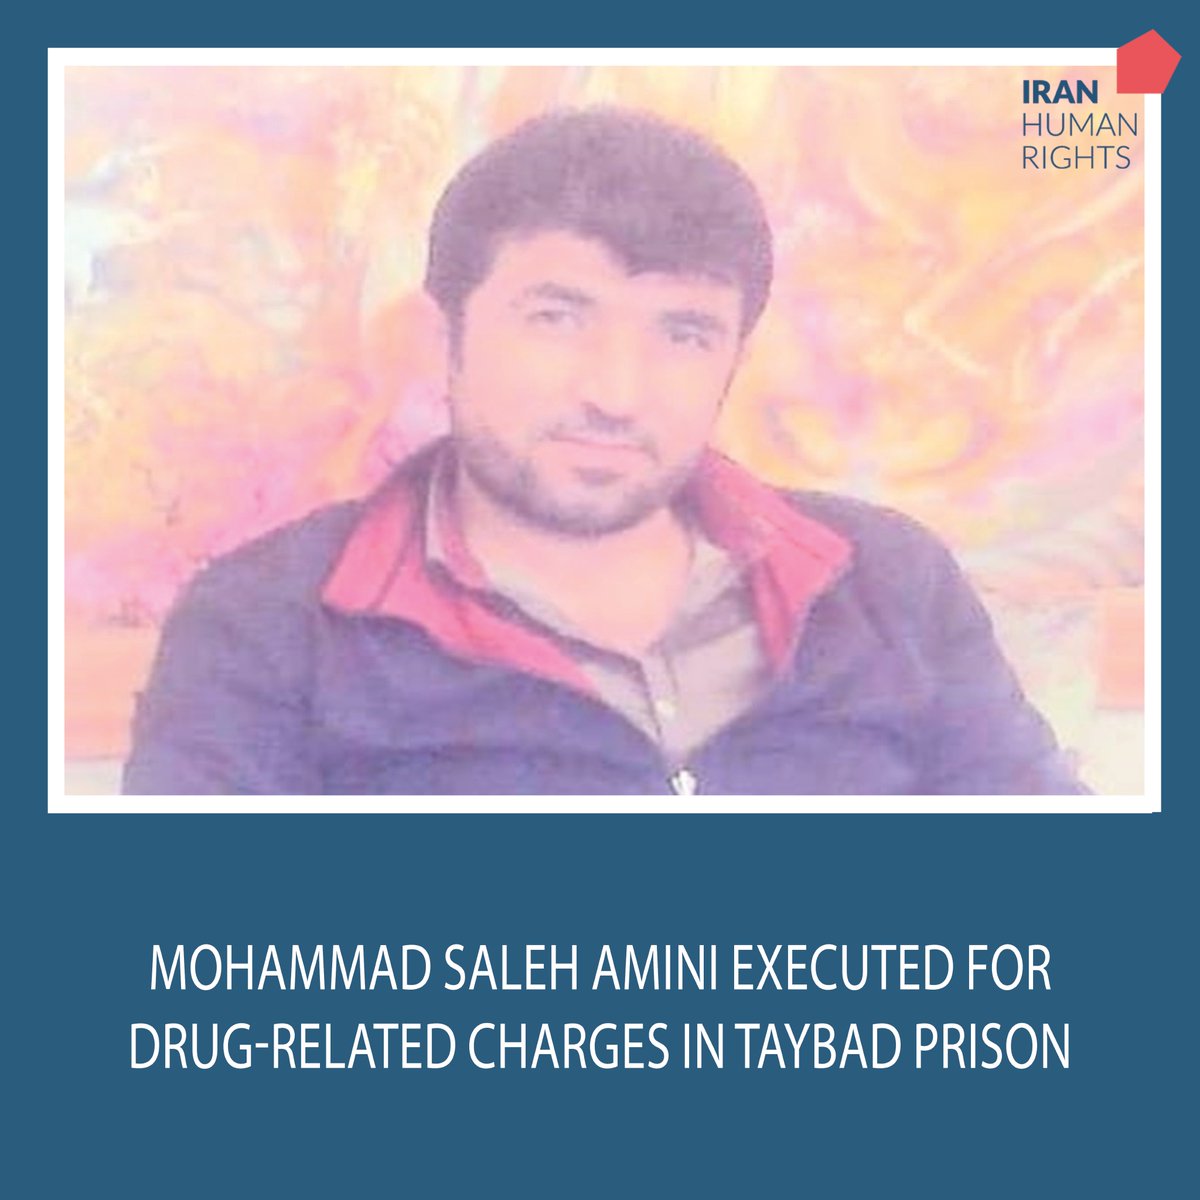 #Iran: 35-year-old Mohammad Saleh Amini who was a chicken farm worker prior to arrest 2 years ago, was executed for drug-related charges in Taybad Prison in Khorasan Razavi province yesterday. #StopExecutionsInIran #NoDeathPenalty iranhr.net/en/articles/64…